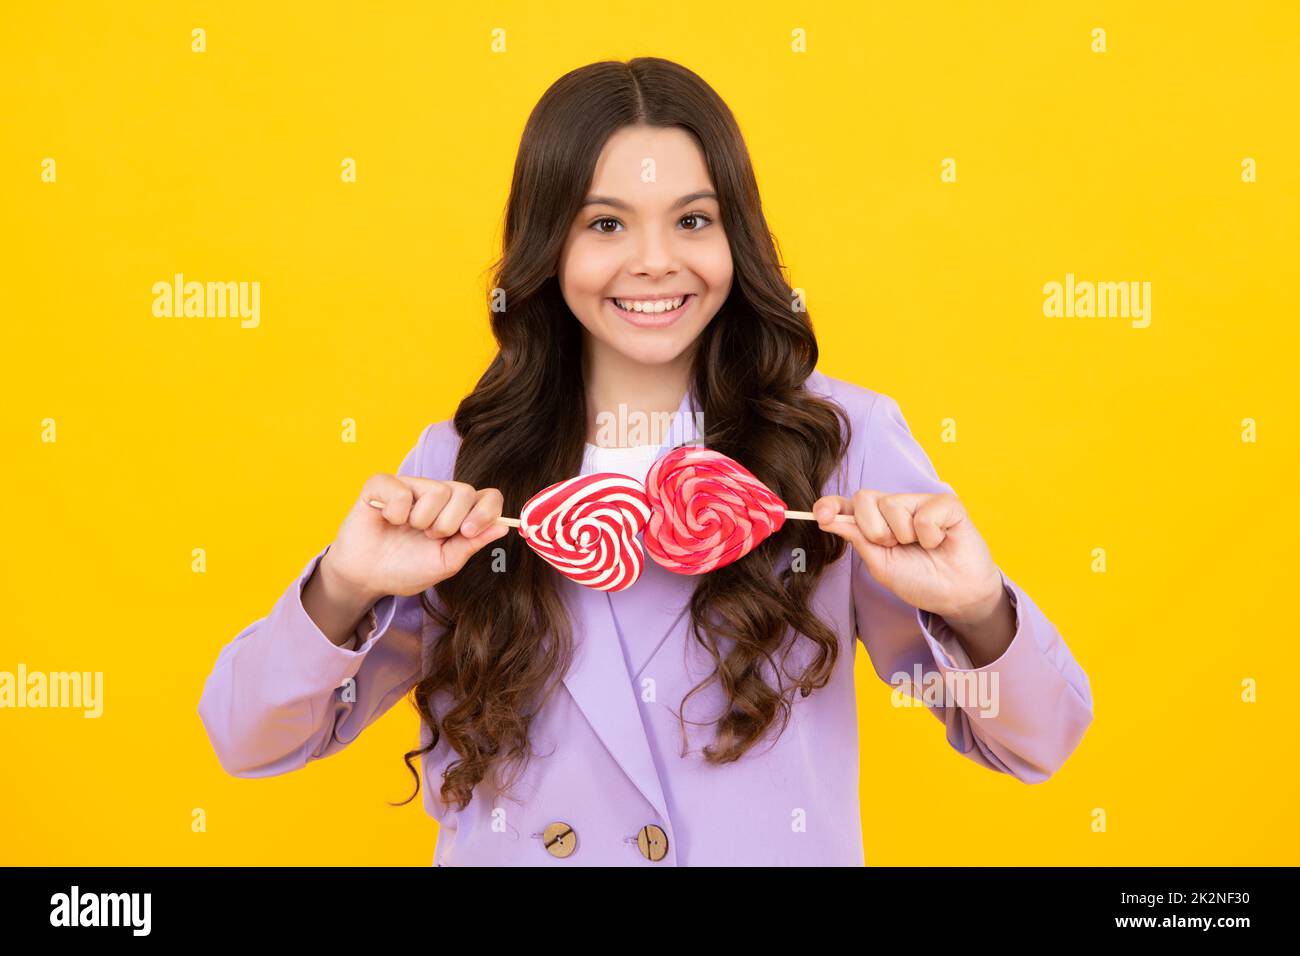 Child with lollipops candy. Stop eating sweets, sugar addiction. Teen dental care, sweet tooth. Stock Photo